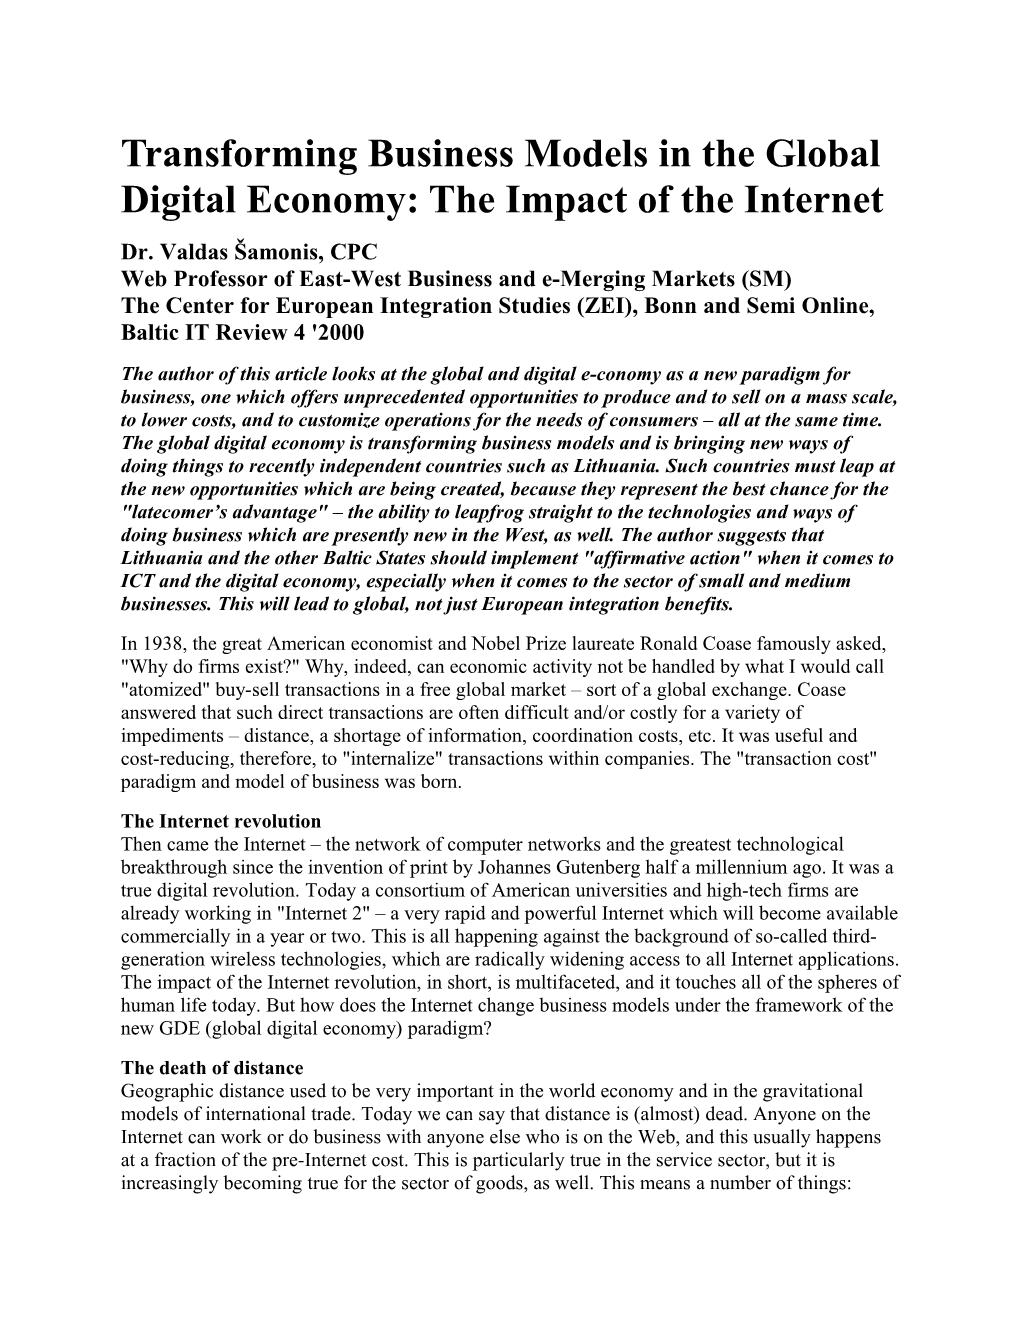 Transforming Business Models in the Global Digital Economy: the Impact of the Internet